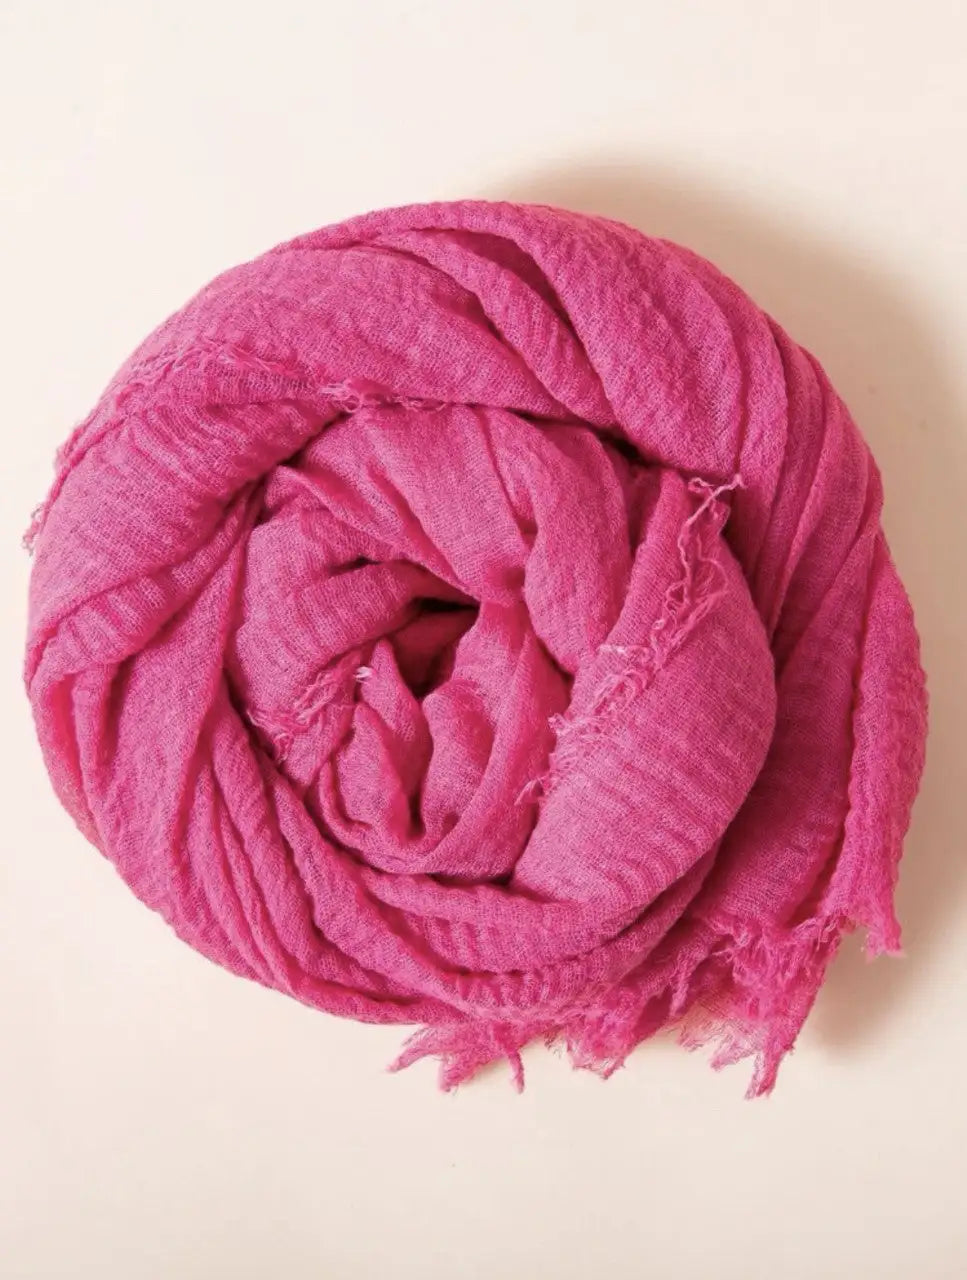 Pink Cotton Scarf for Women - Cotton Scarf Bright Pink